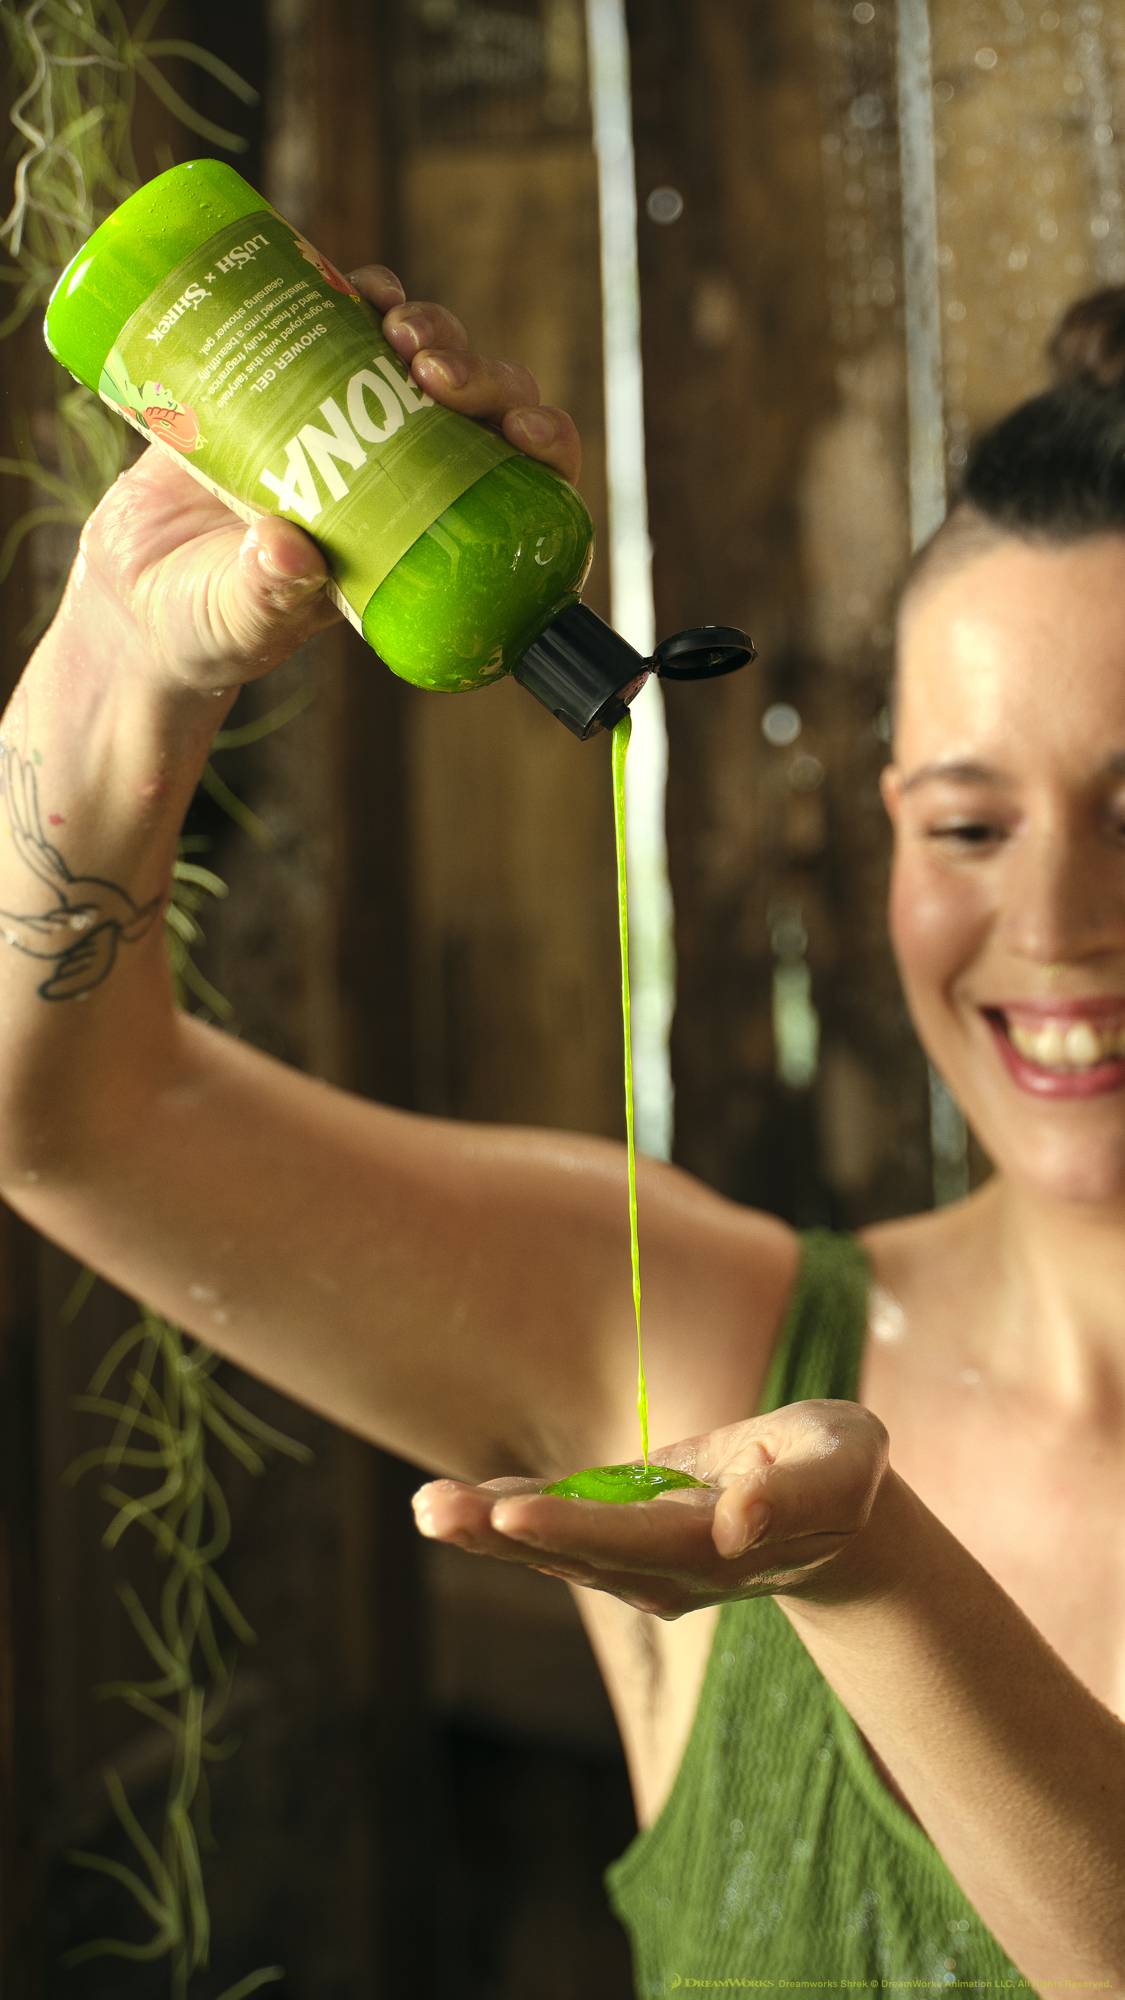 A close-up shot of the model in the wooden outhouse squeezing the bright green Fiona shower gel product from the bottle into their hand. 